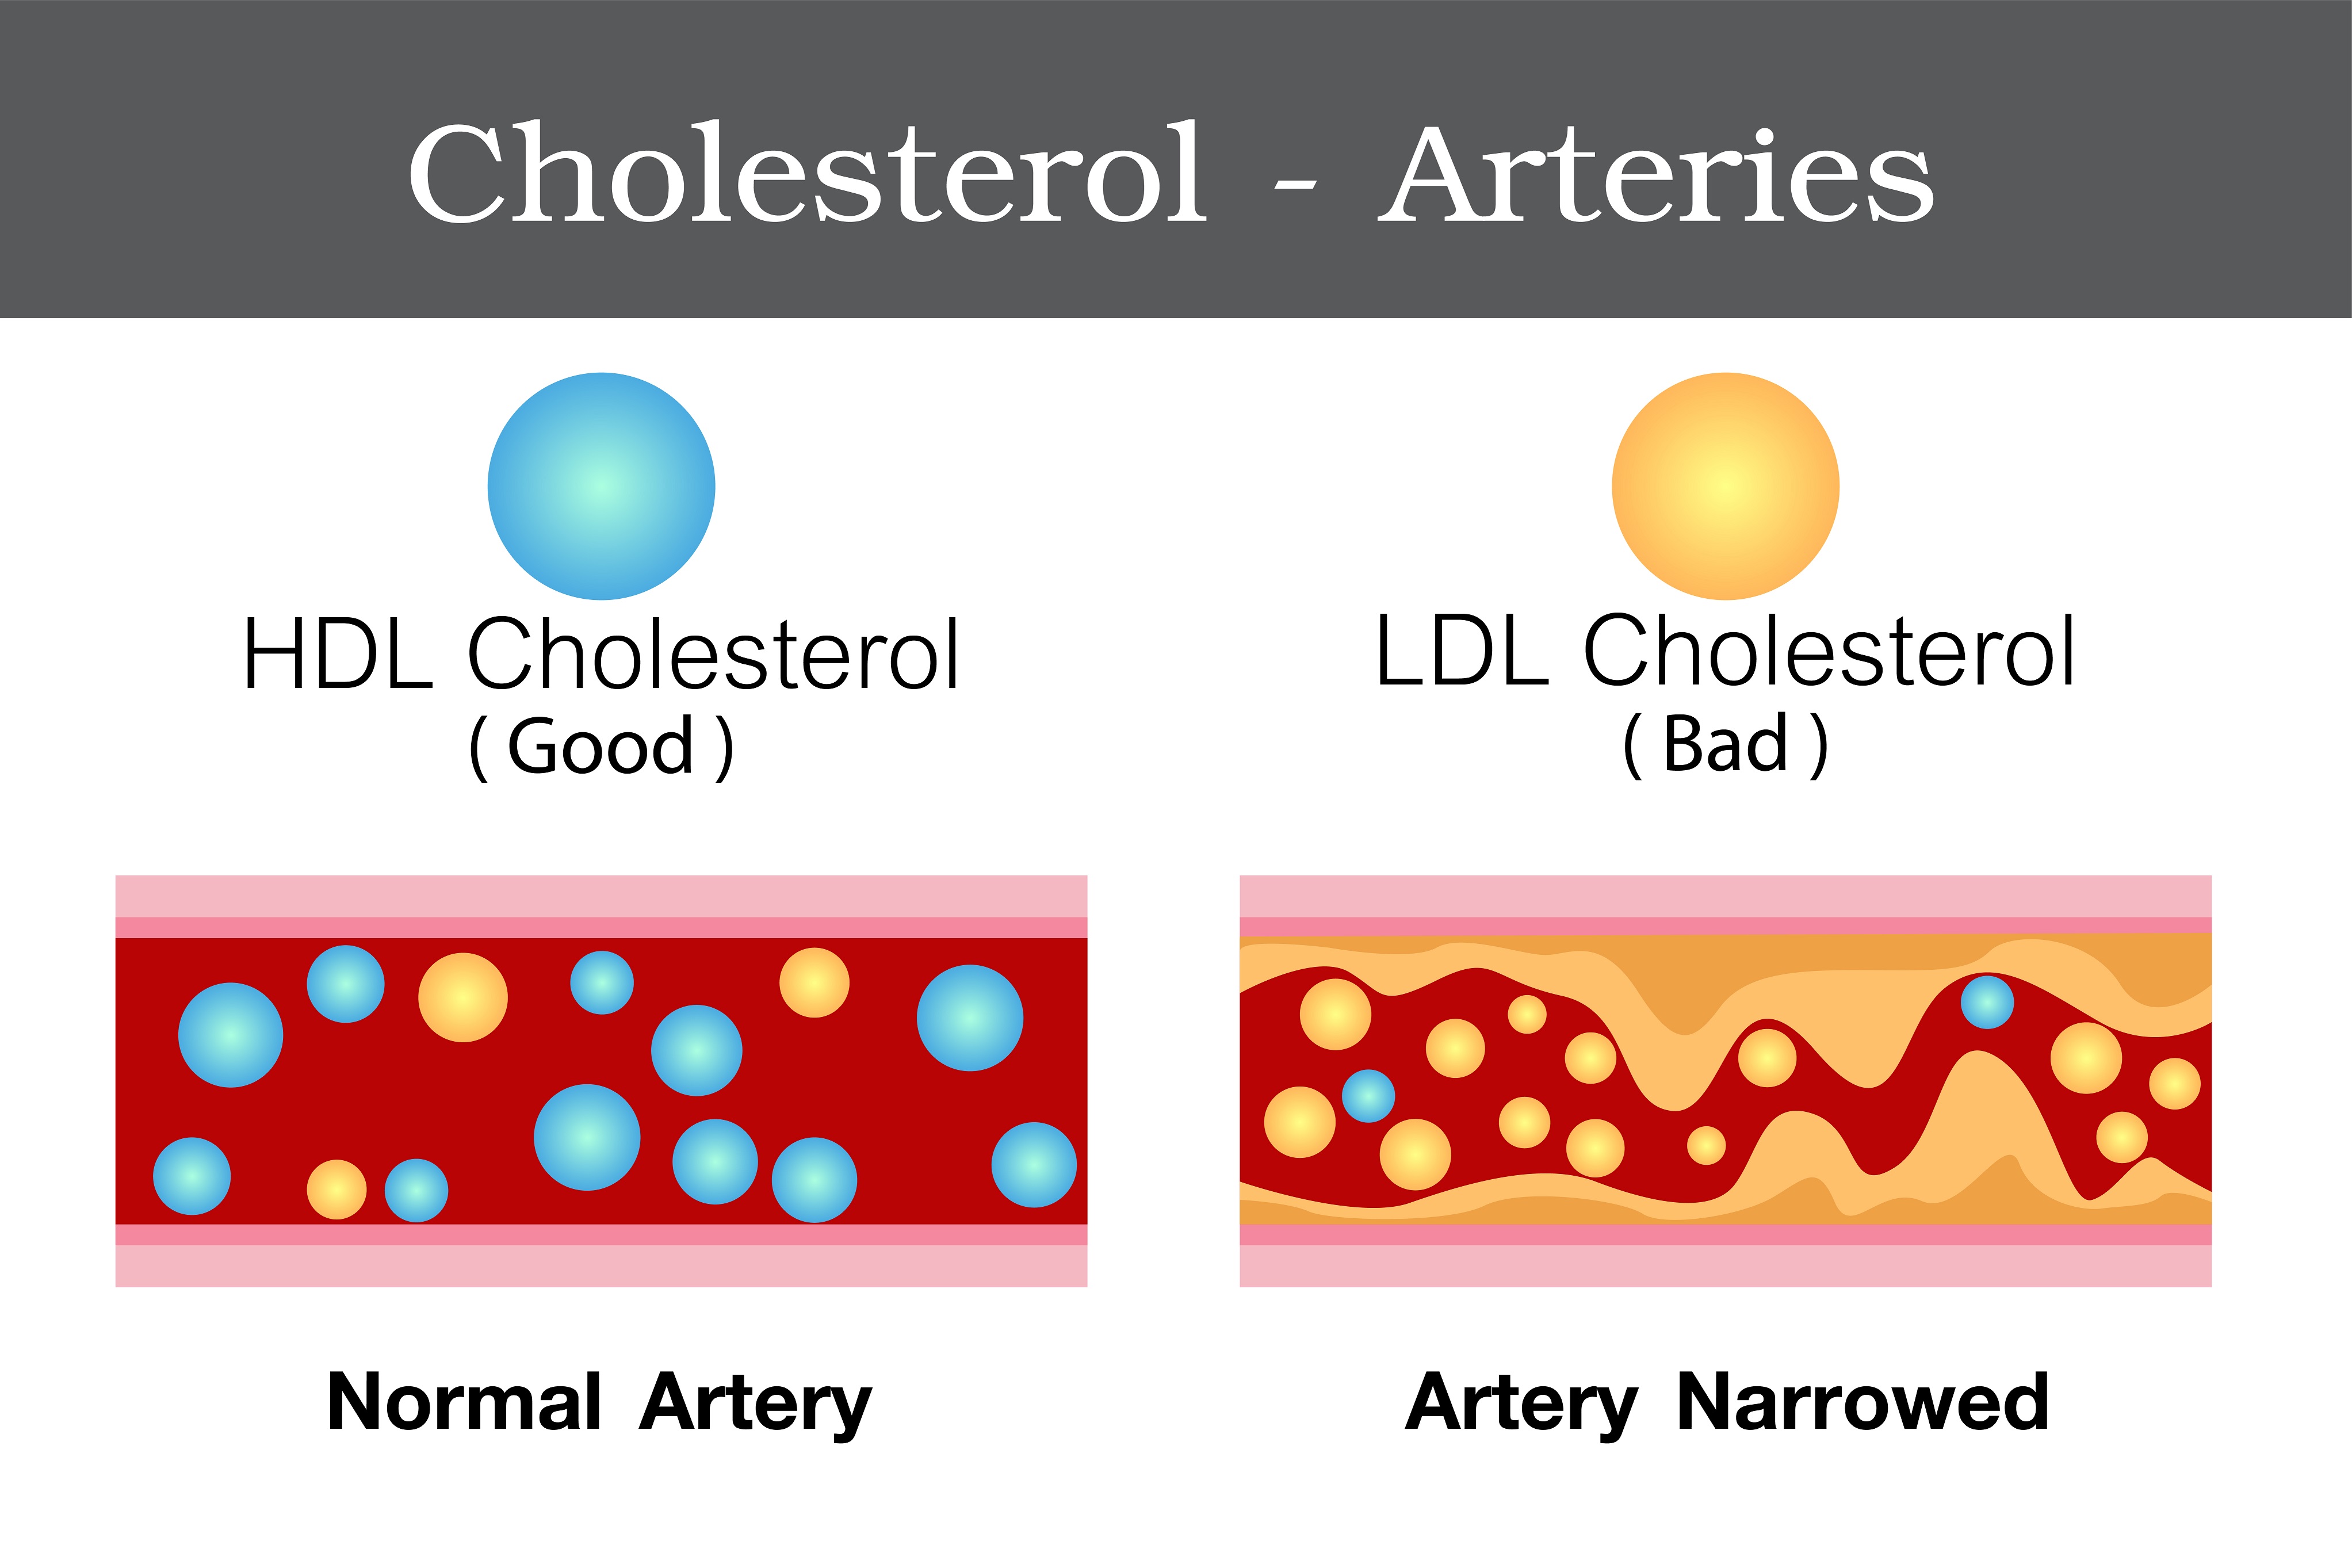 How specific fractions of cholesterol work in our arteries